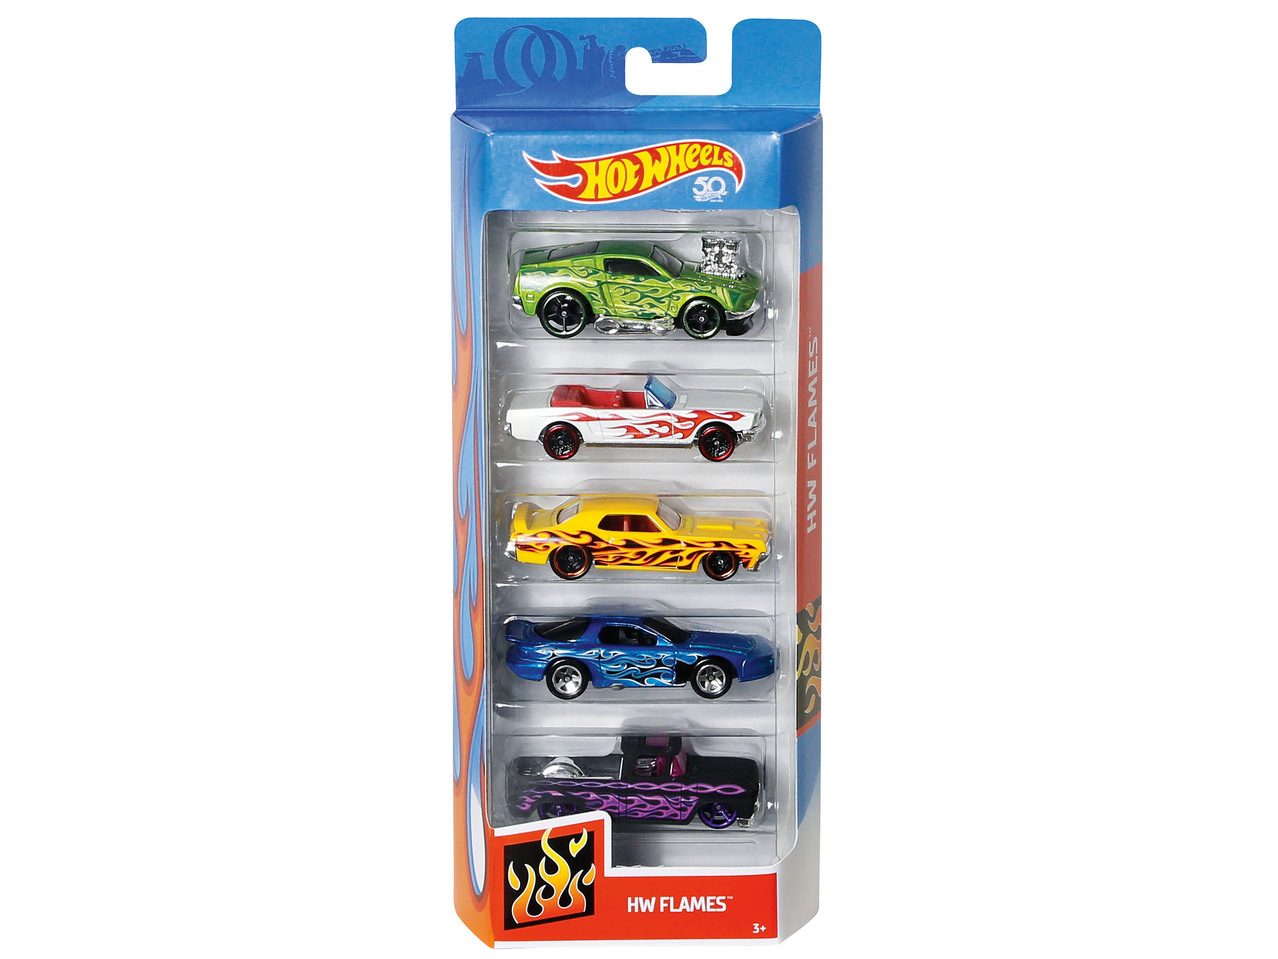 Model Cars, 5 pieces